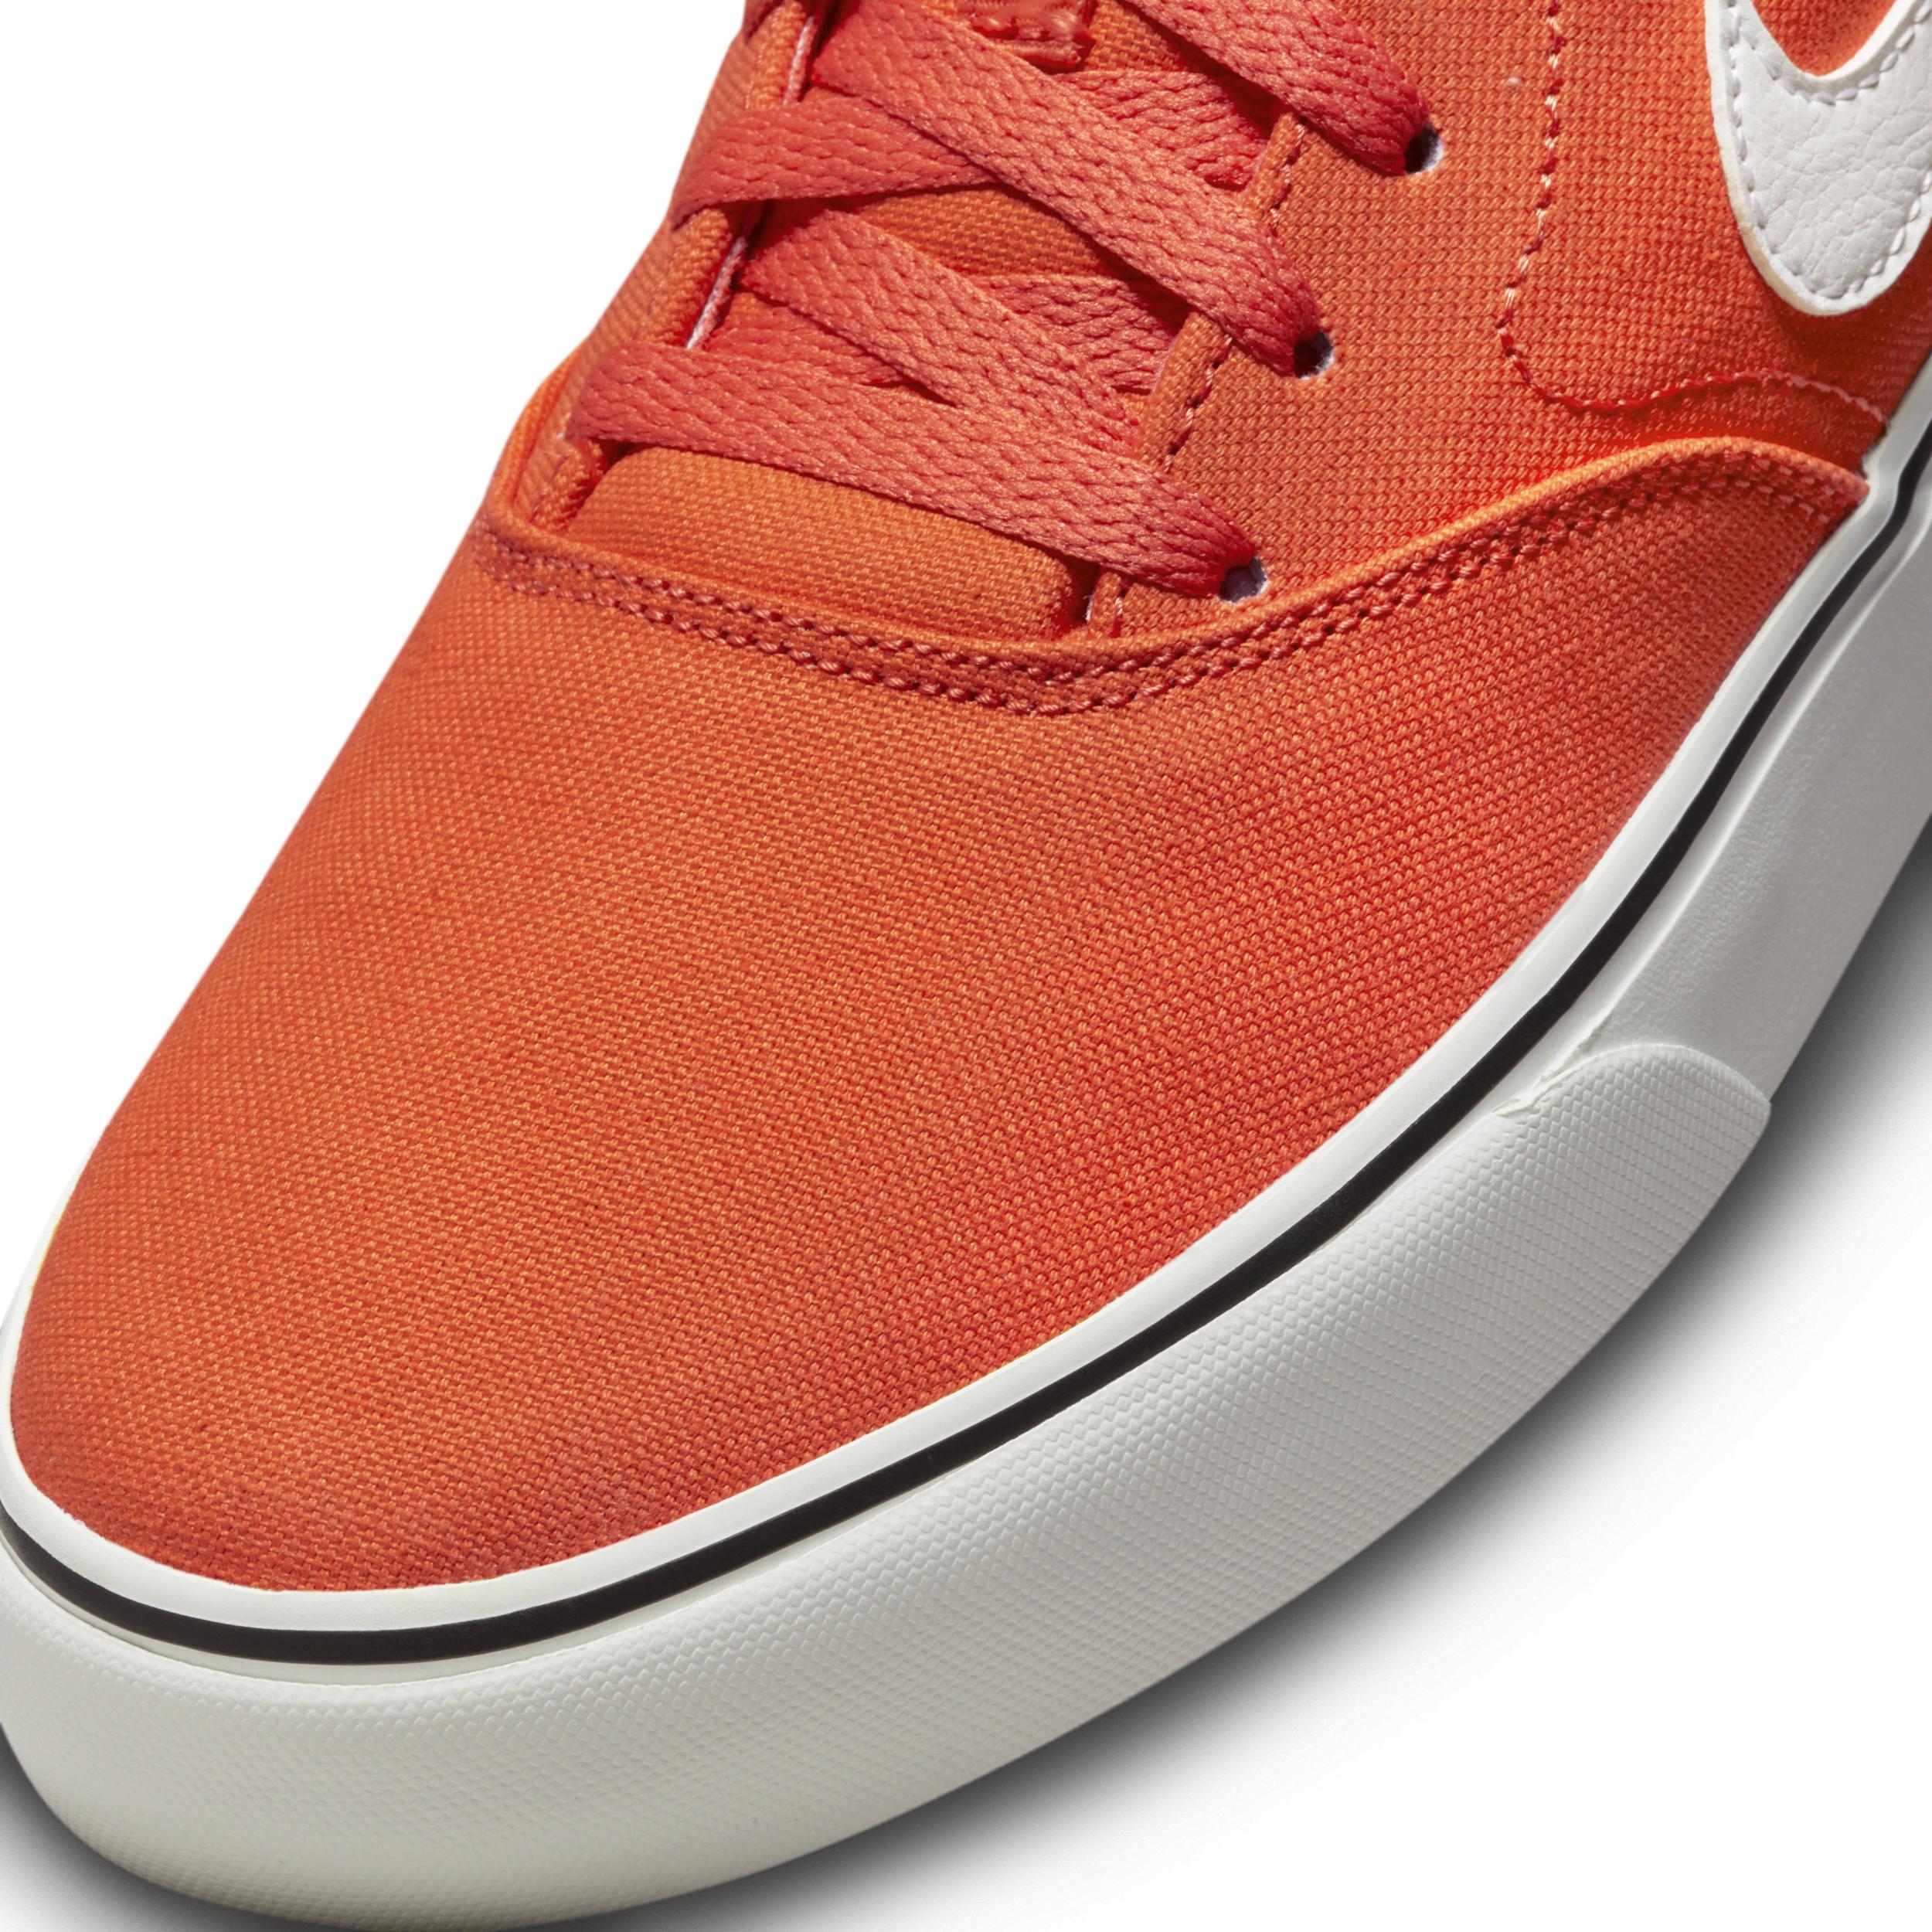 Nike Sb Chron 2 Canvas Skate Shoes in Red | Lyst